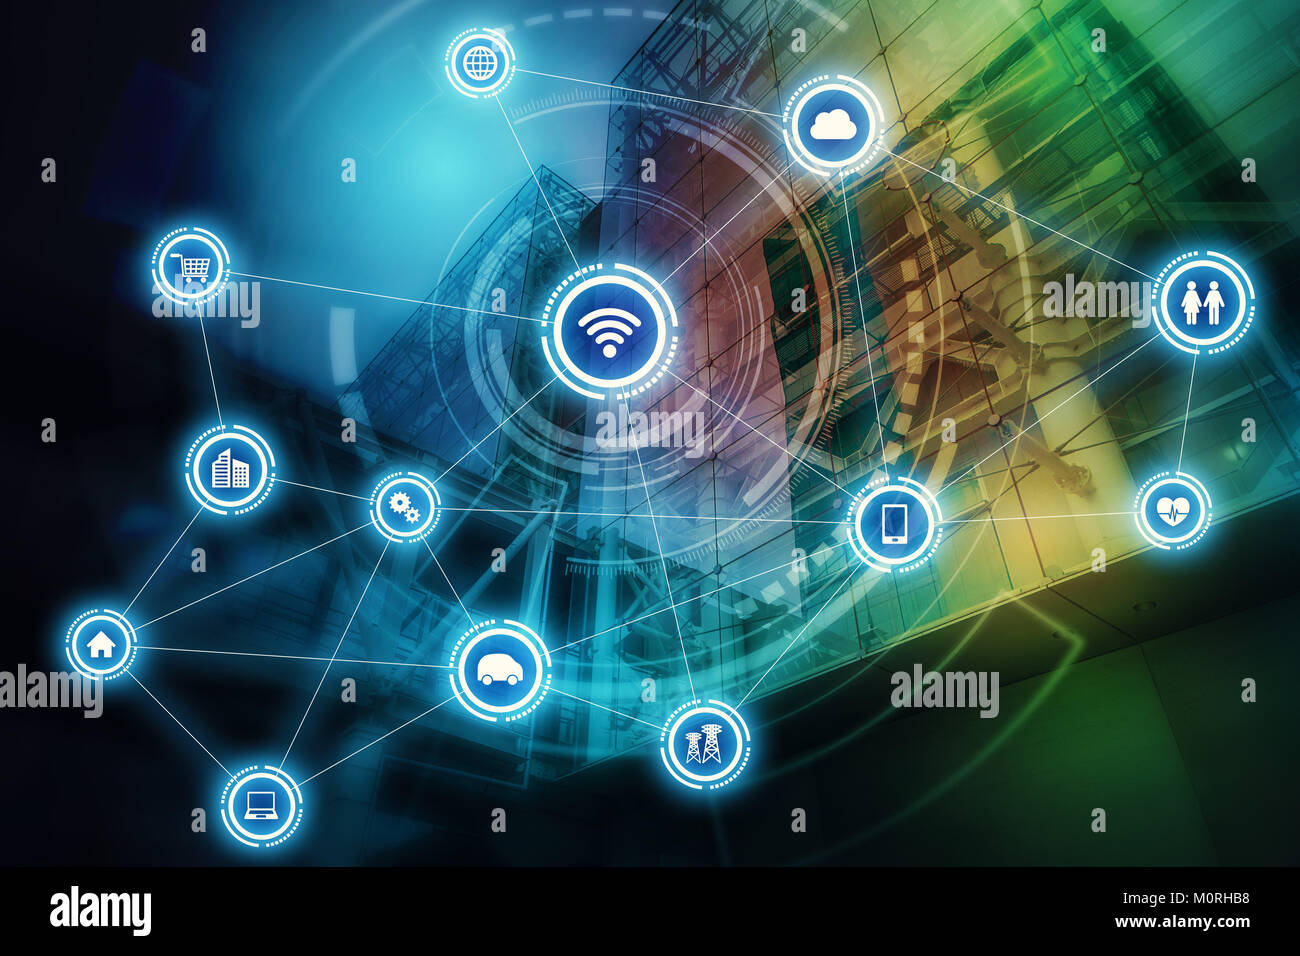 smart building and wireless communication network, abstract image visual, internet of things Stock Photo